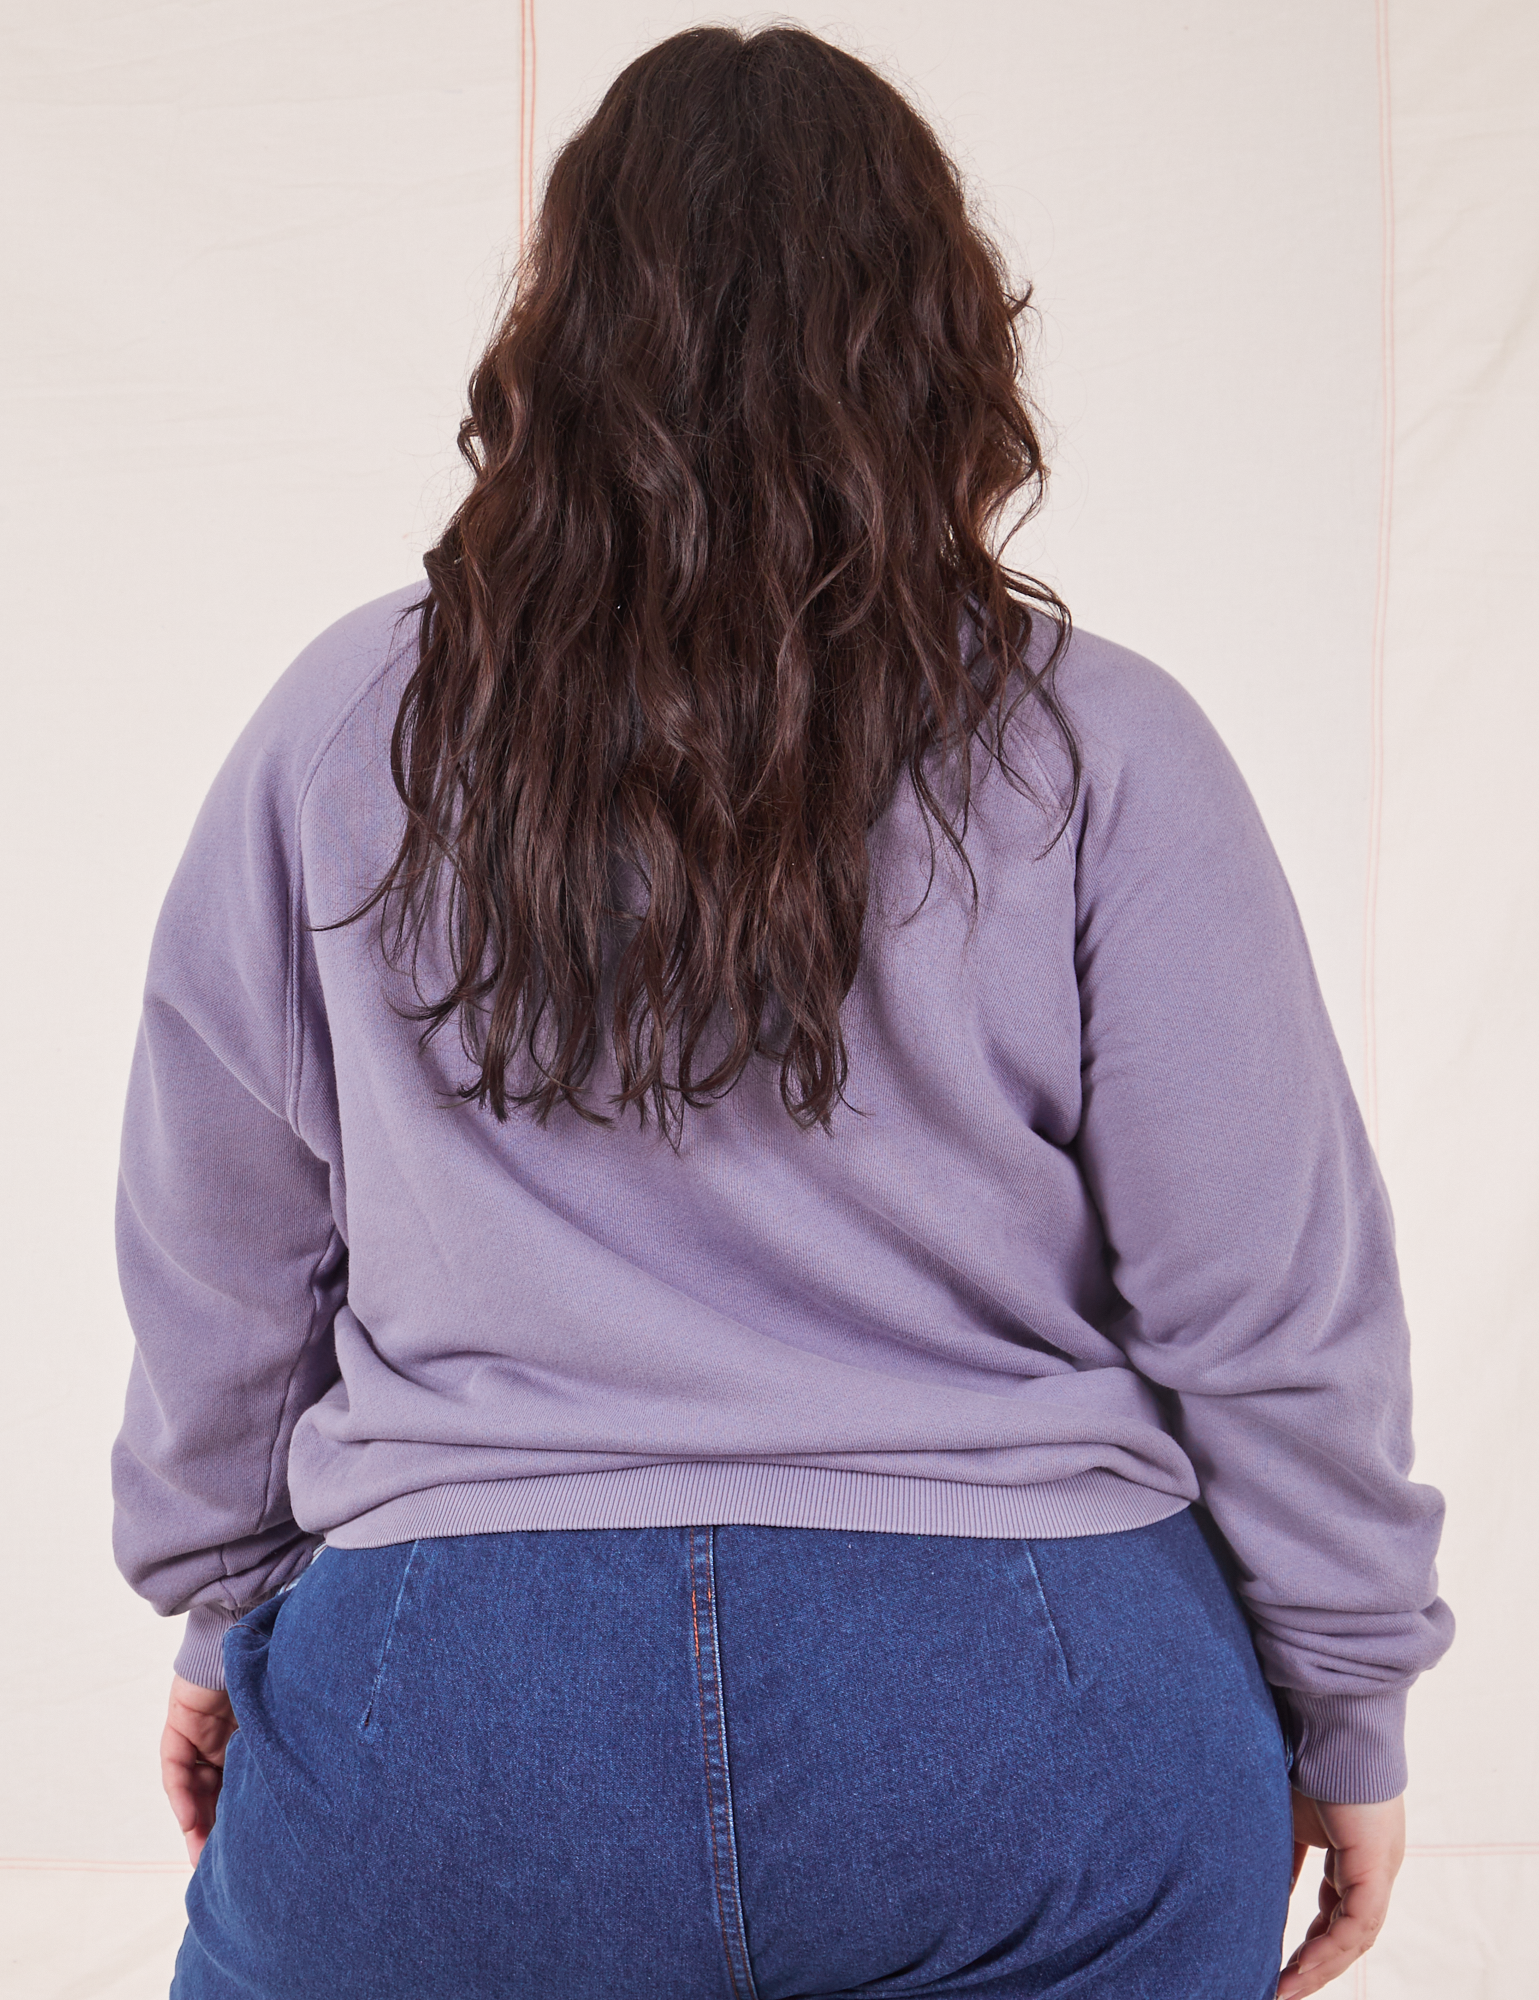 Bill Ogden&#39;s Sun Baby Crew in Faded Grape back view on Ashley